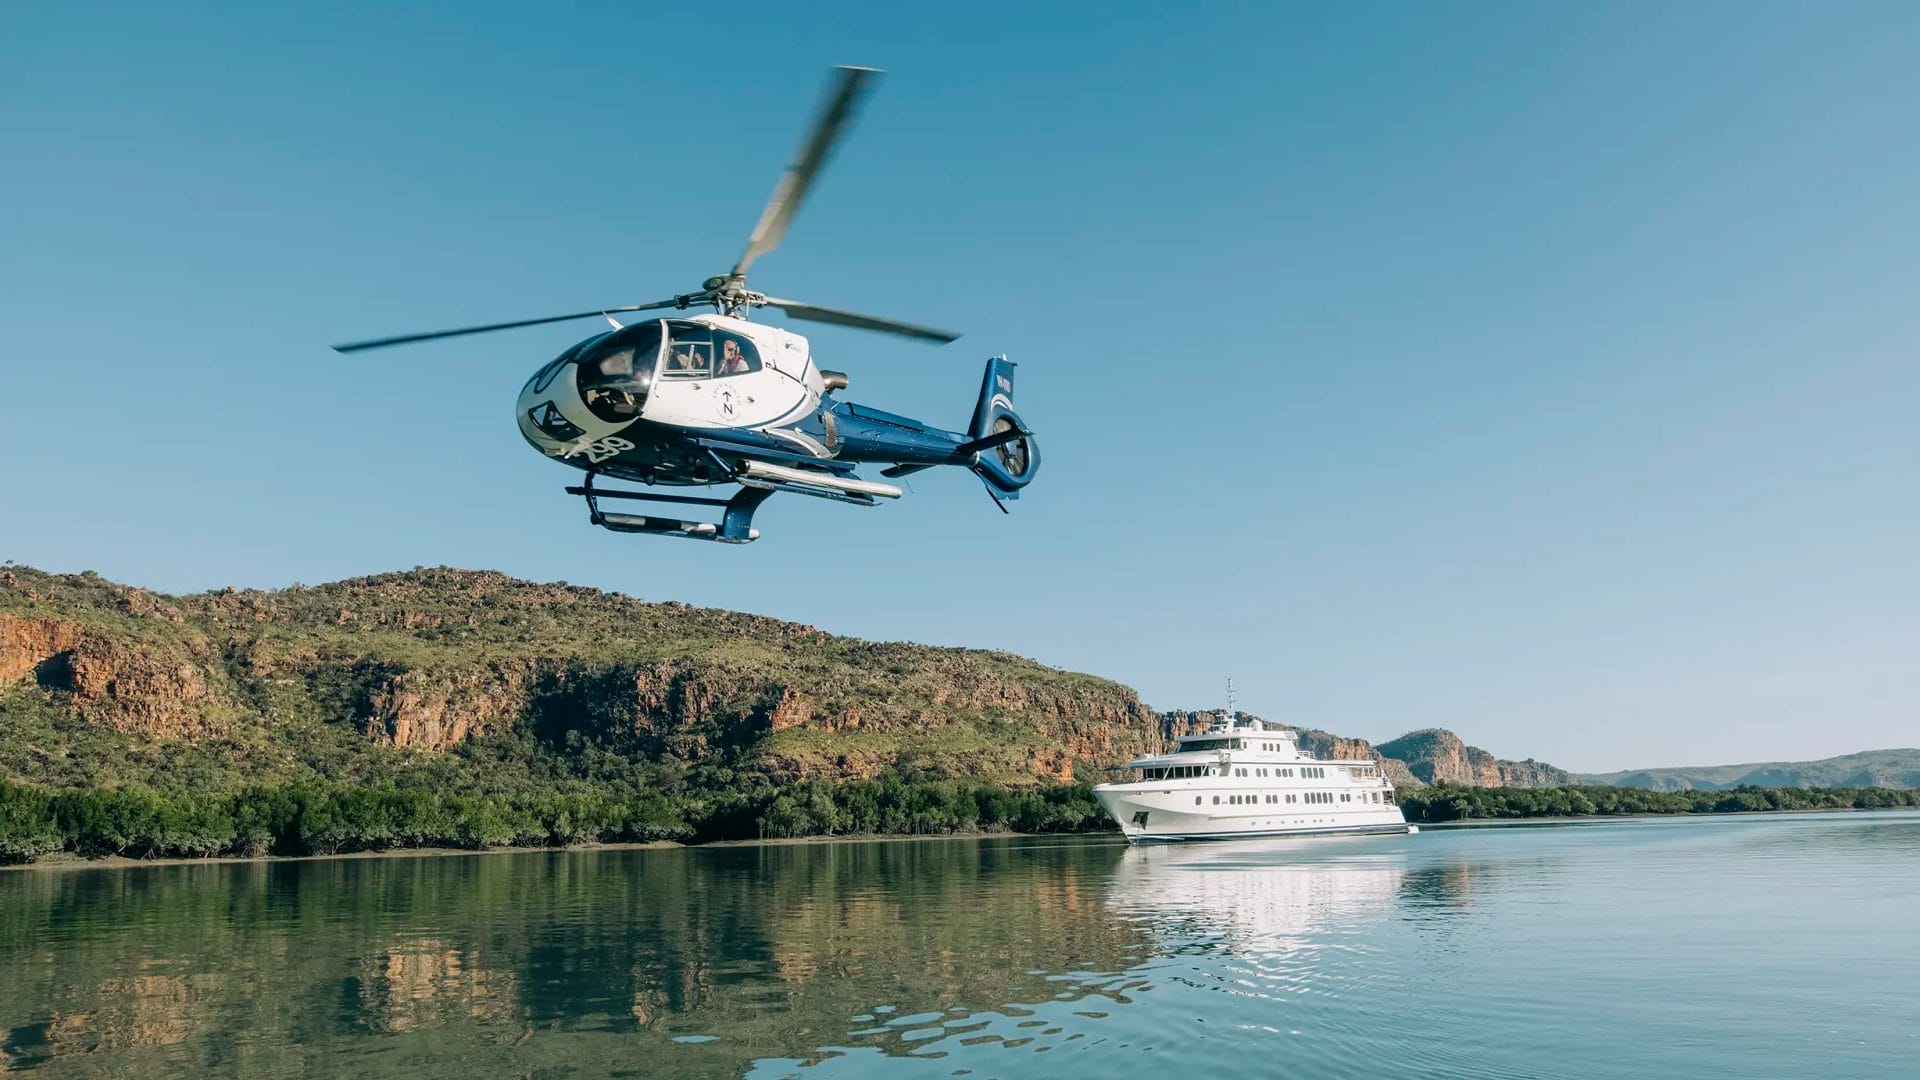 Helicopter in flight over waters in the Kimberley with True North vessel in the background